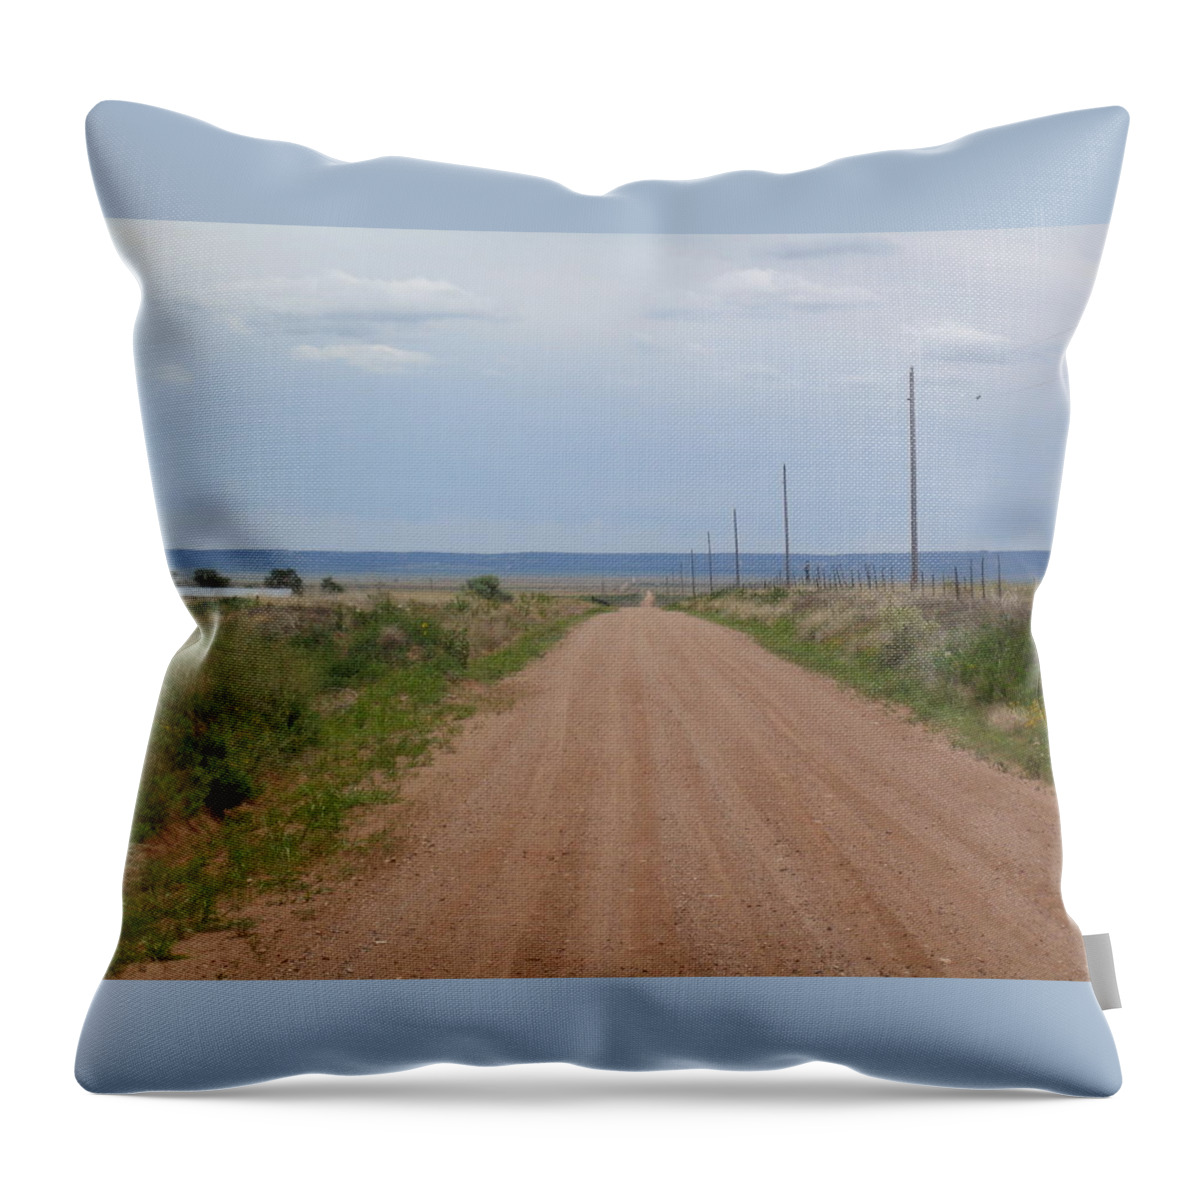  Throw Pillow featuring the photograph Country US road by Nicola De Rossi